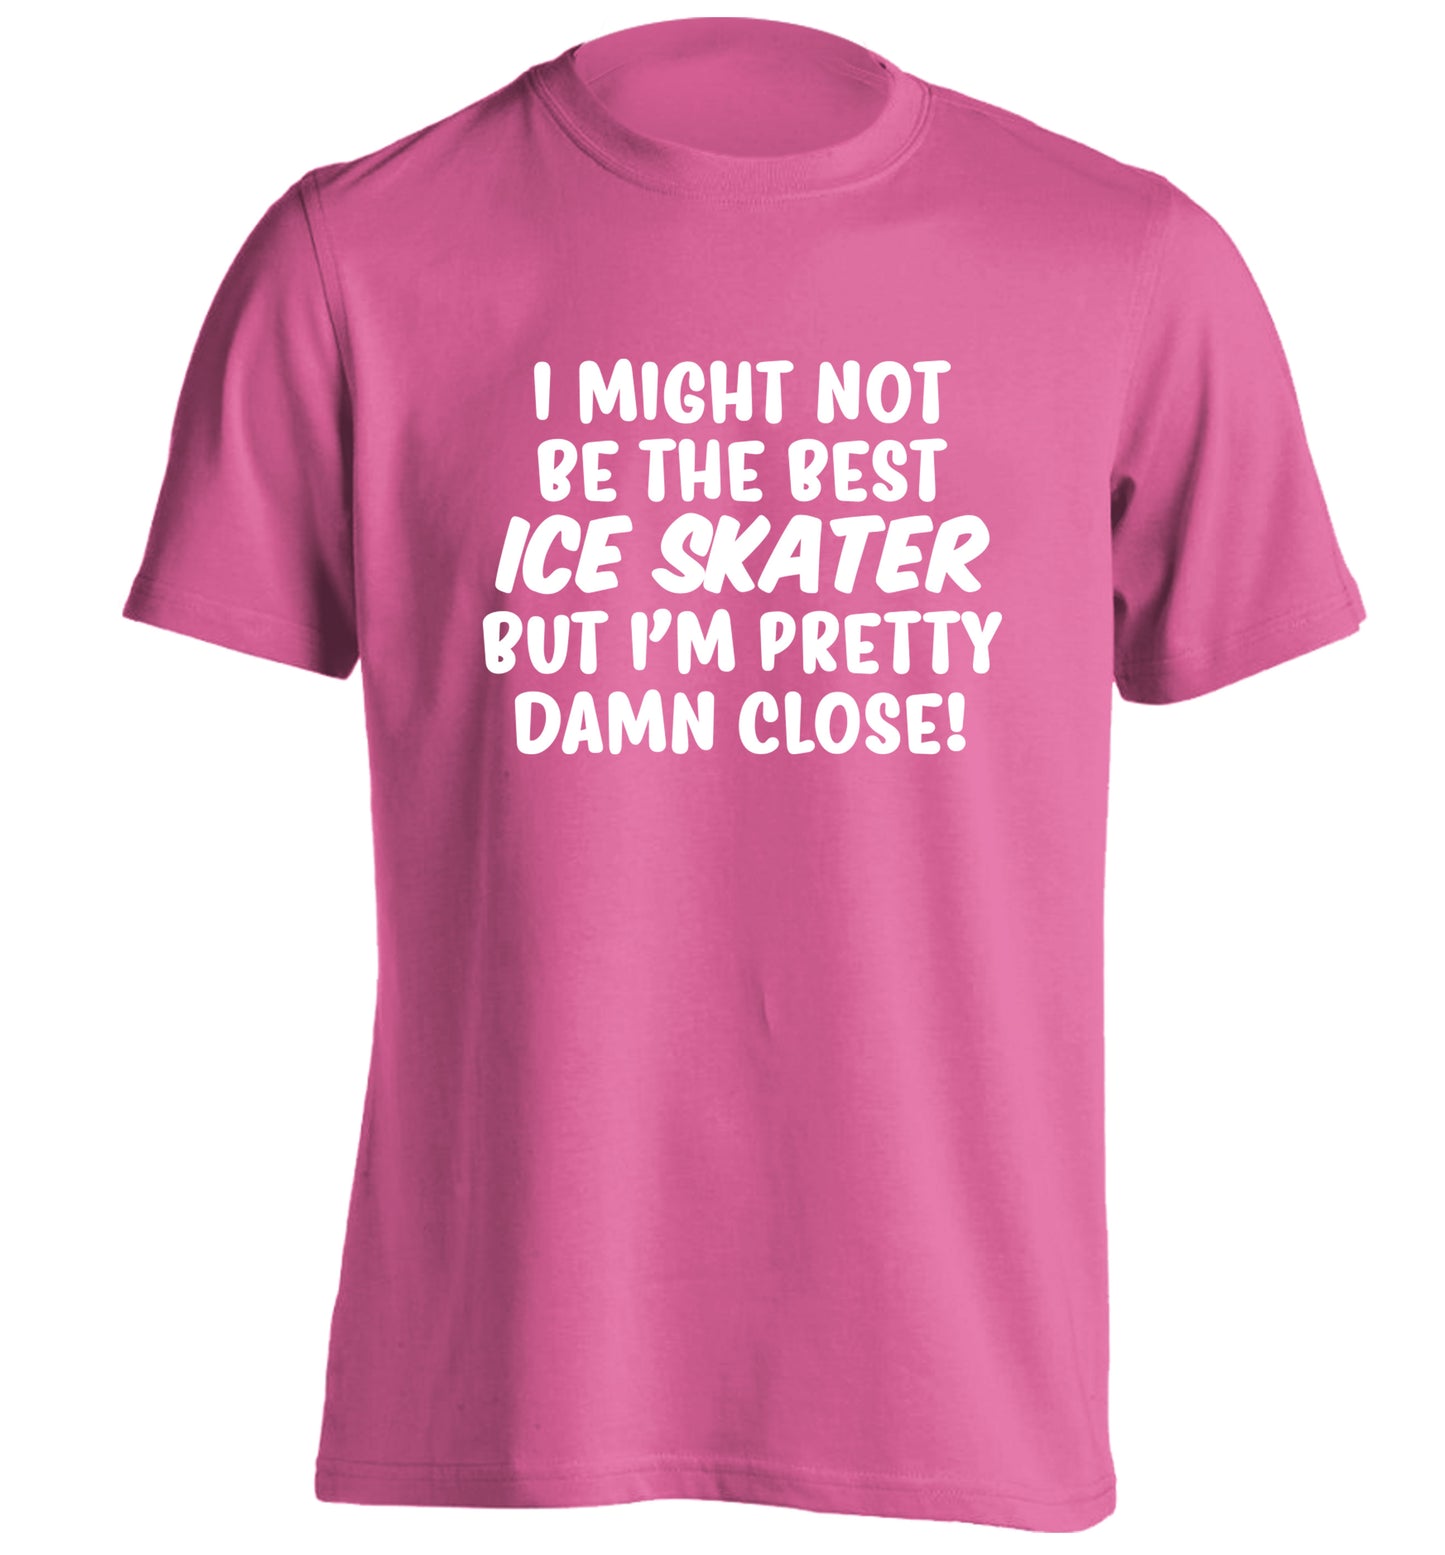 I might not be the best ice skater but I'm pretty damn close! adults unisexpink Tshirt 2XL